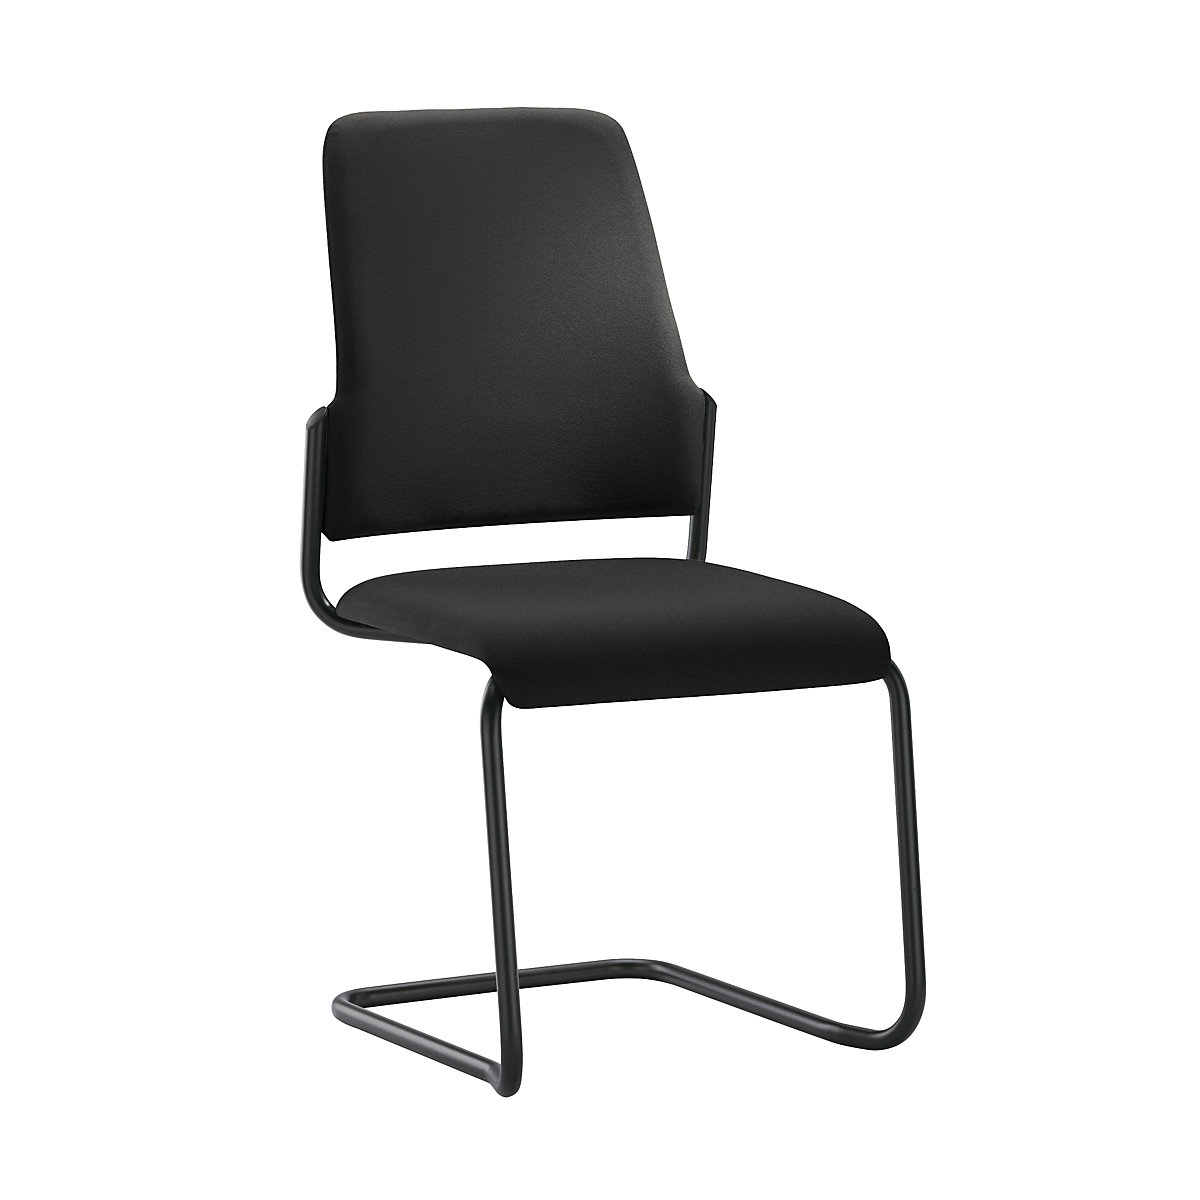 GOAL visitors' chair, cantilever, pack of 2 - interstuhl